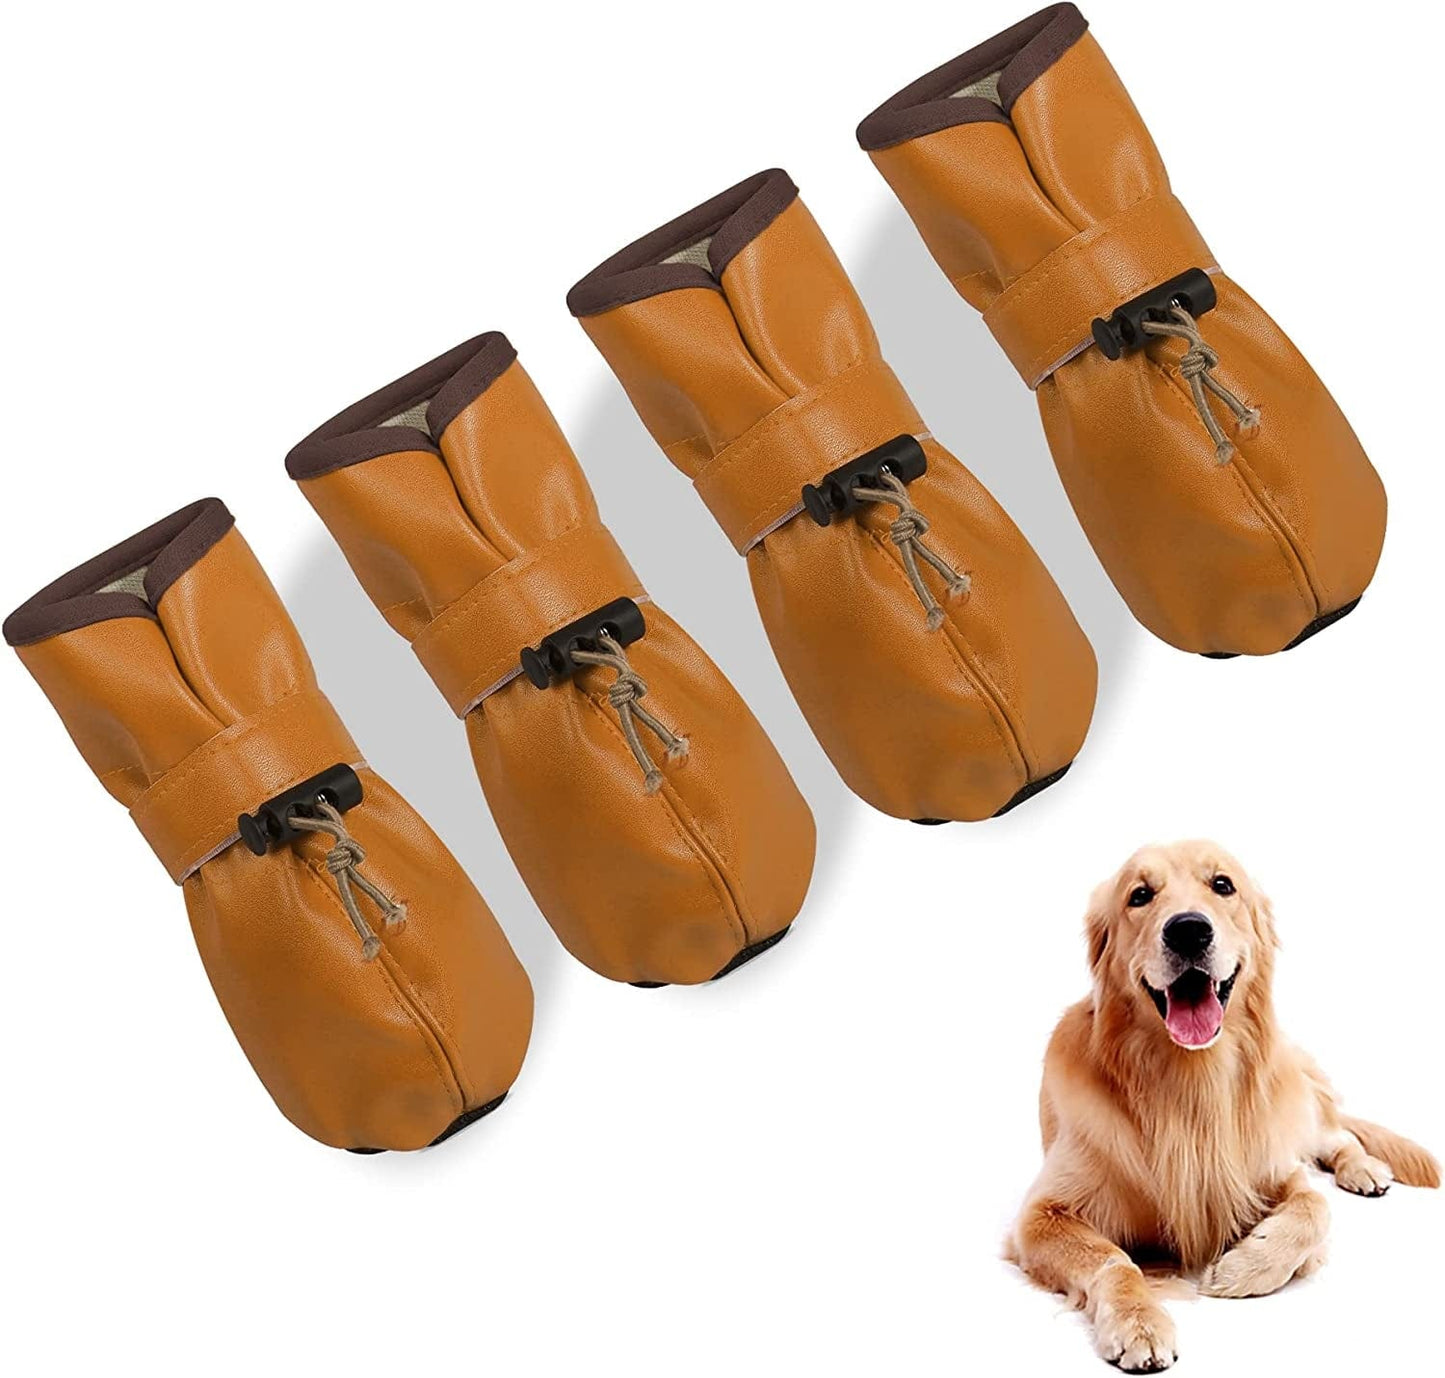 YAODHAOD Dog Shoes for Large Dogs, Dog Boots Paw Protectors for Hot Pavement, Leather Anti-Slip Adjustable Booties,For Indoor Hardwood Floor Traction Control & Outdoor Wlaking Hikin (Size 8, Black)